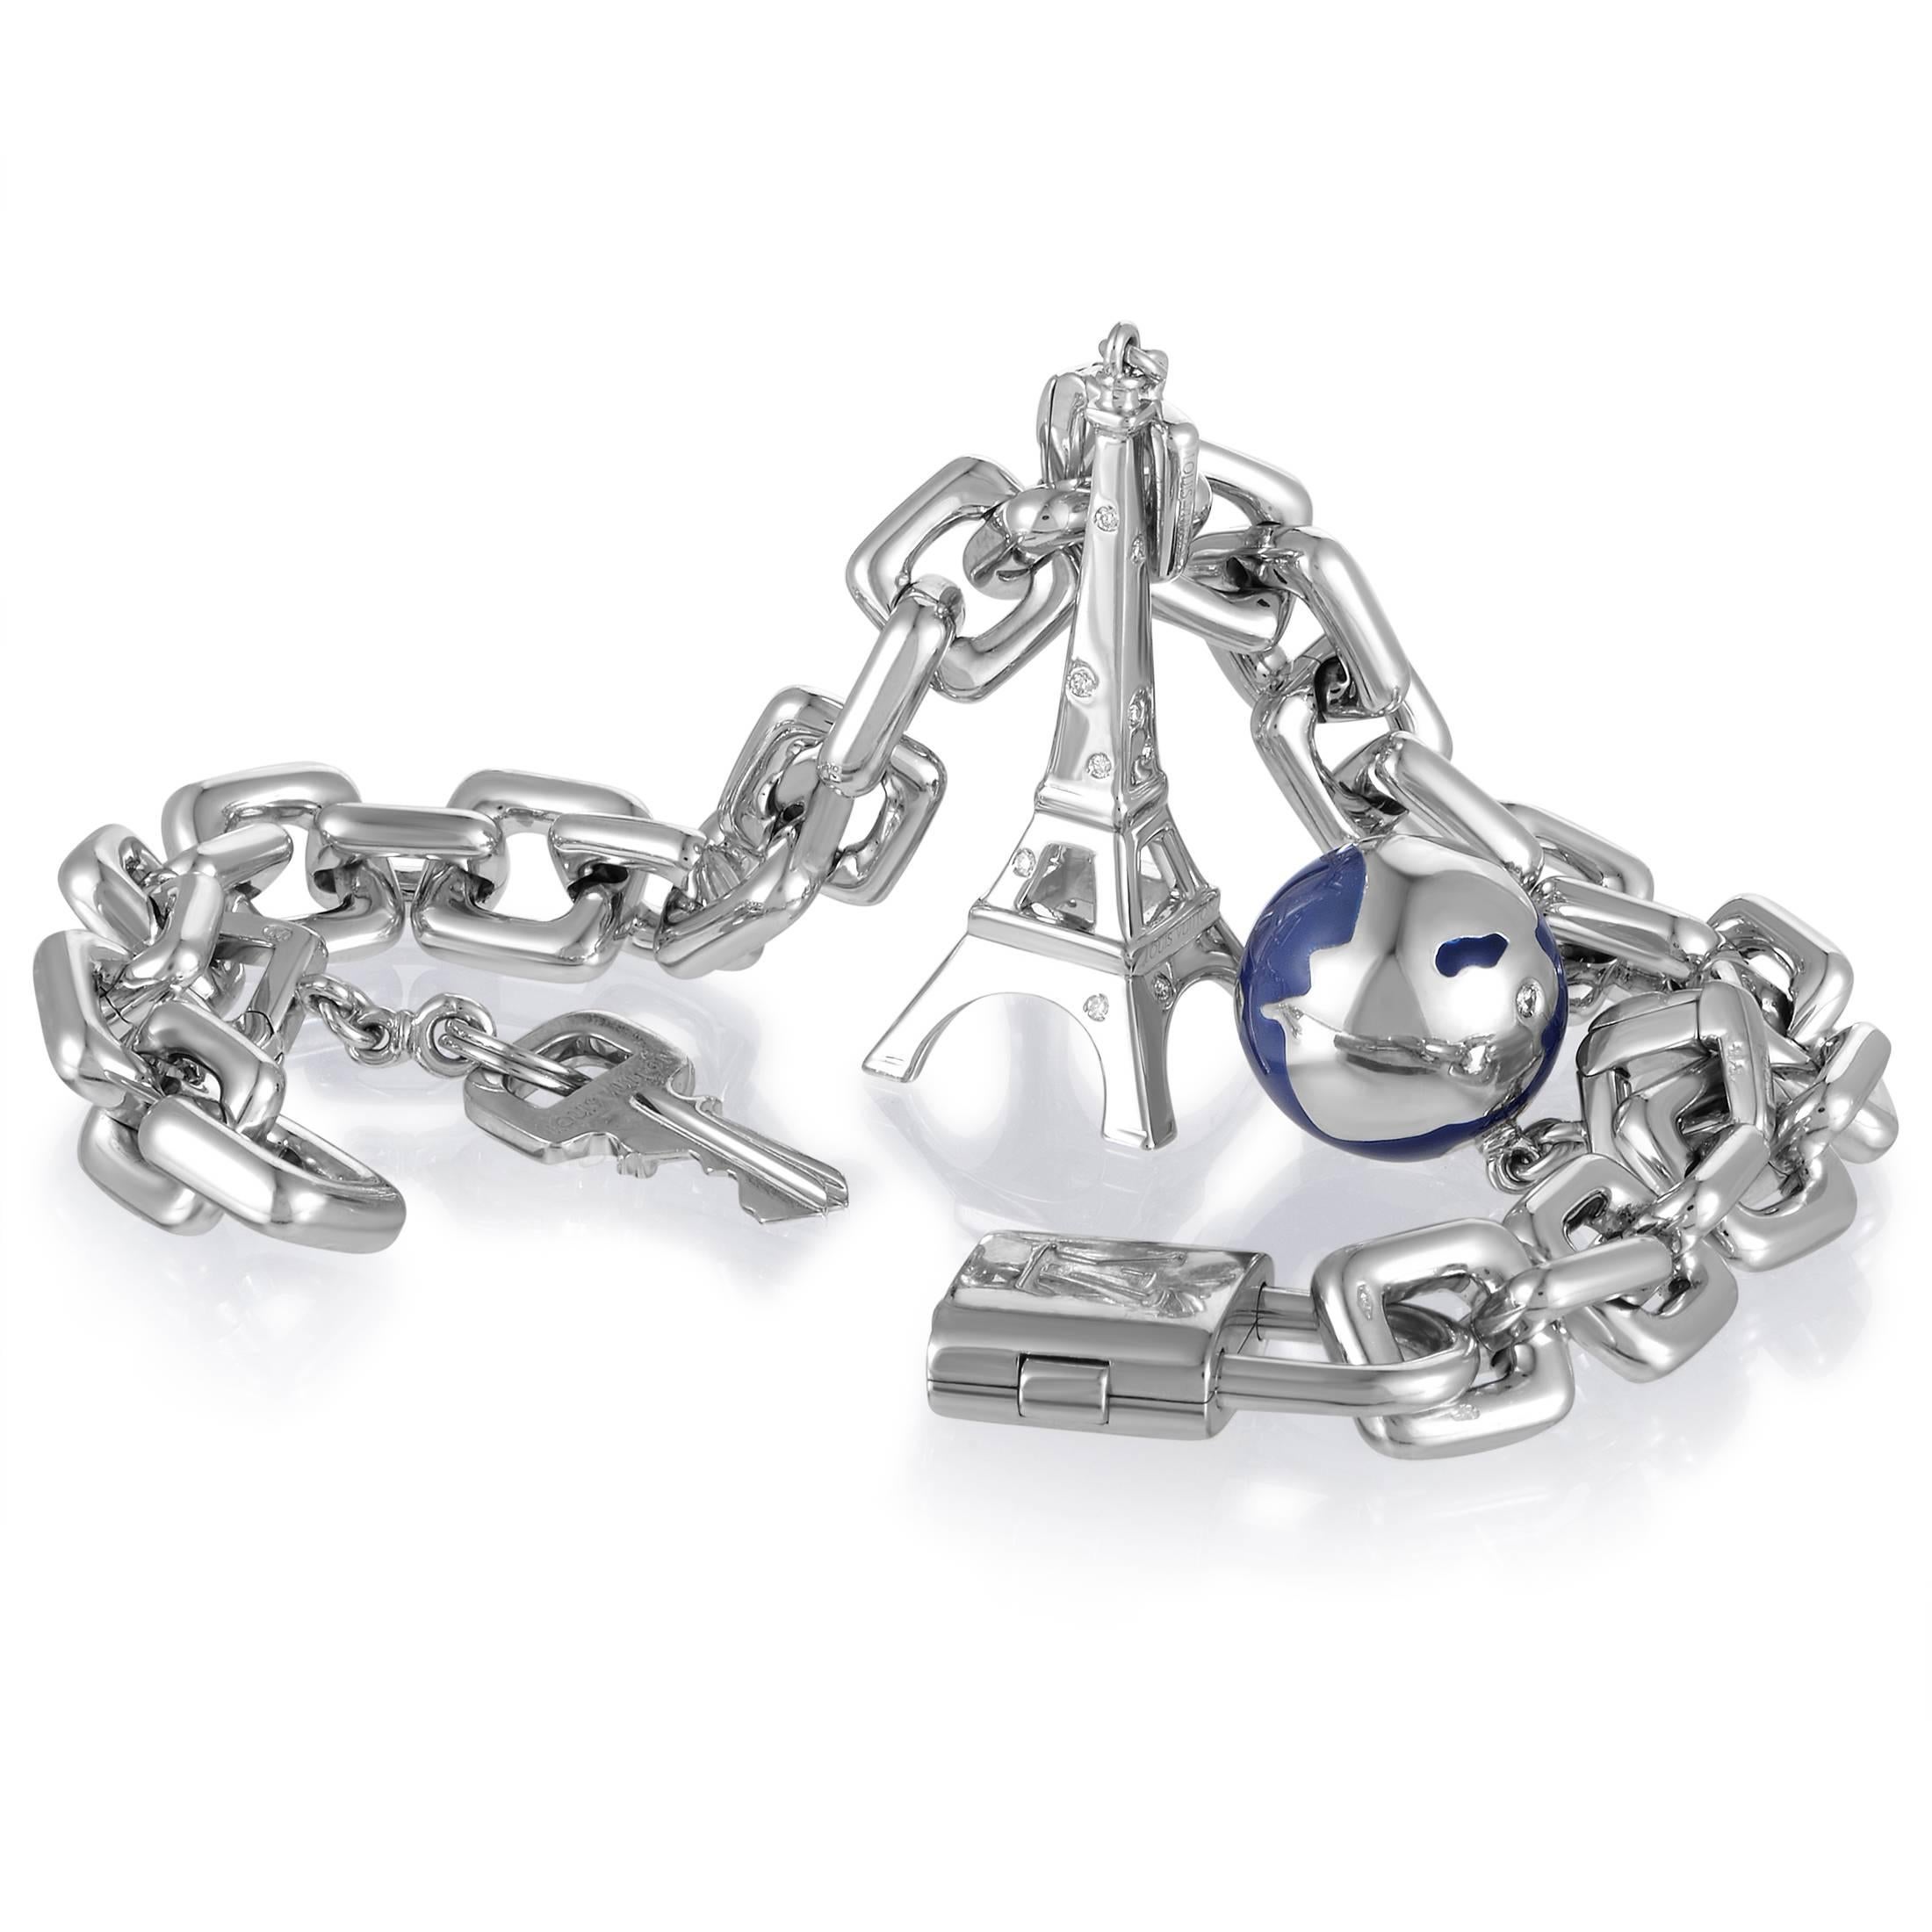 An adorable blend of marvelous charms including the Eiffel tower and nifty key is arranged along the splendidly gleaming chain made of precious 18K white gold in this exceptional bracelet from Louis Vuitton which boasts glittering diamonds and